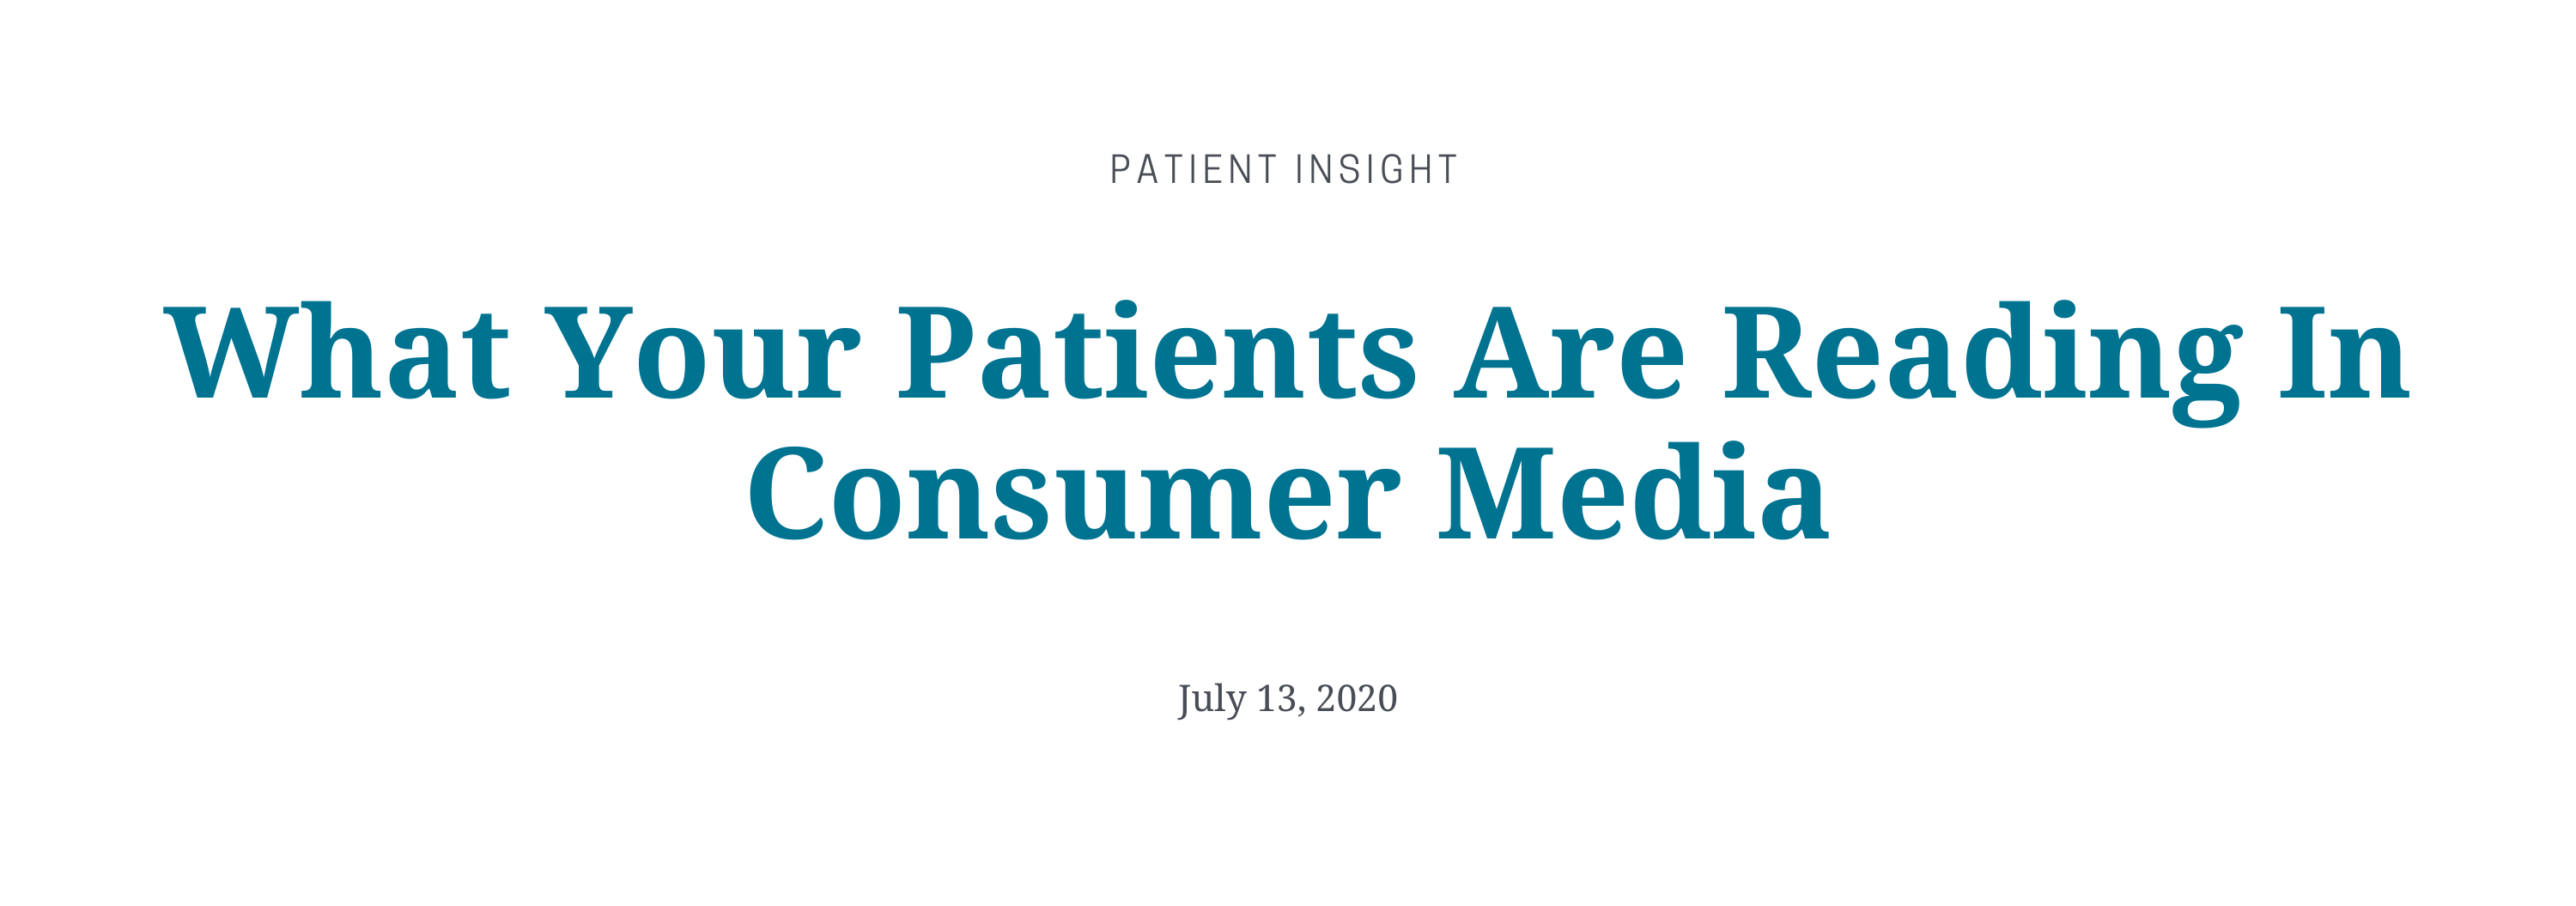 patient insight July 13